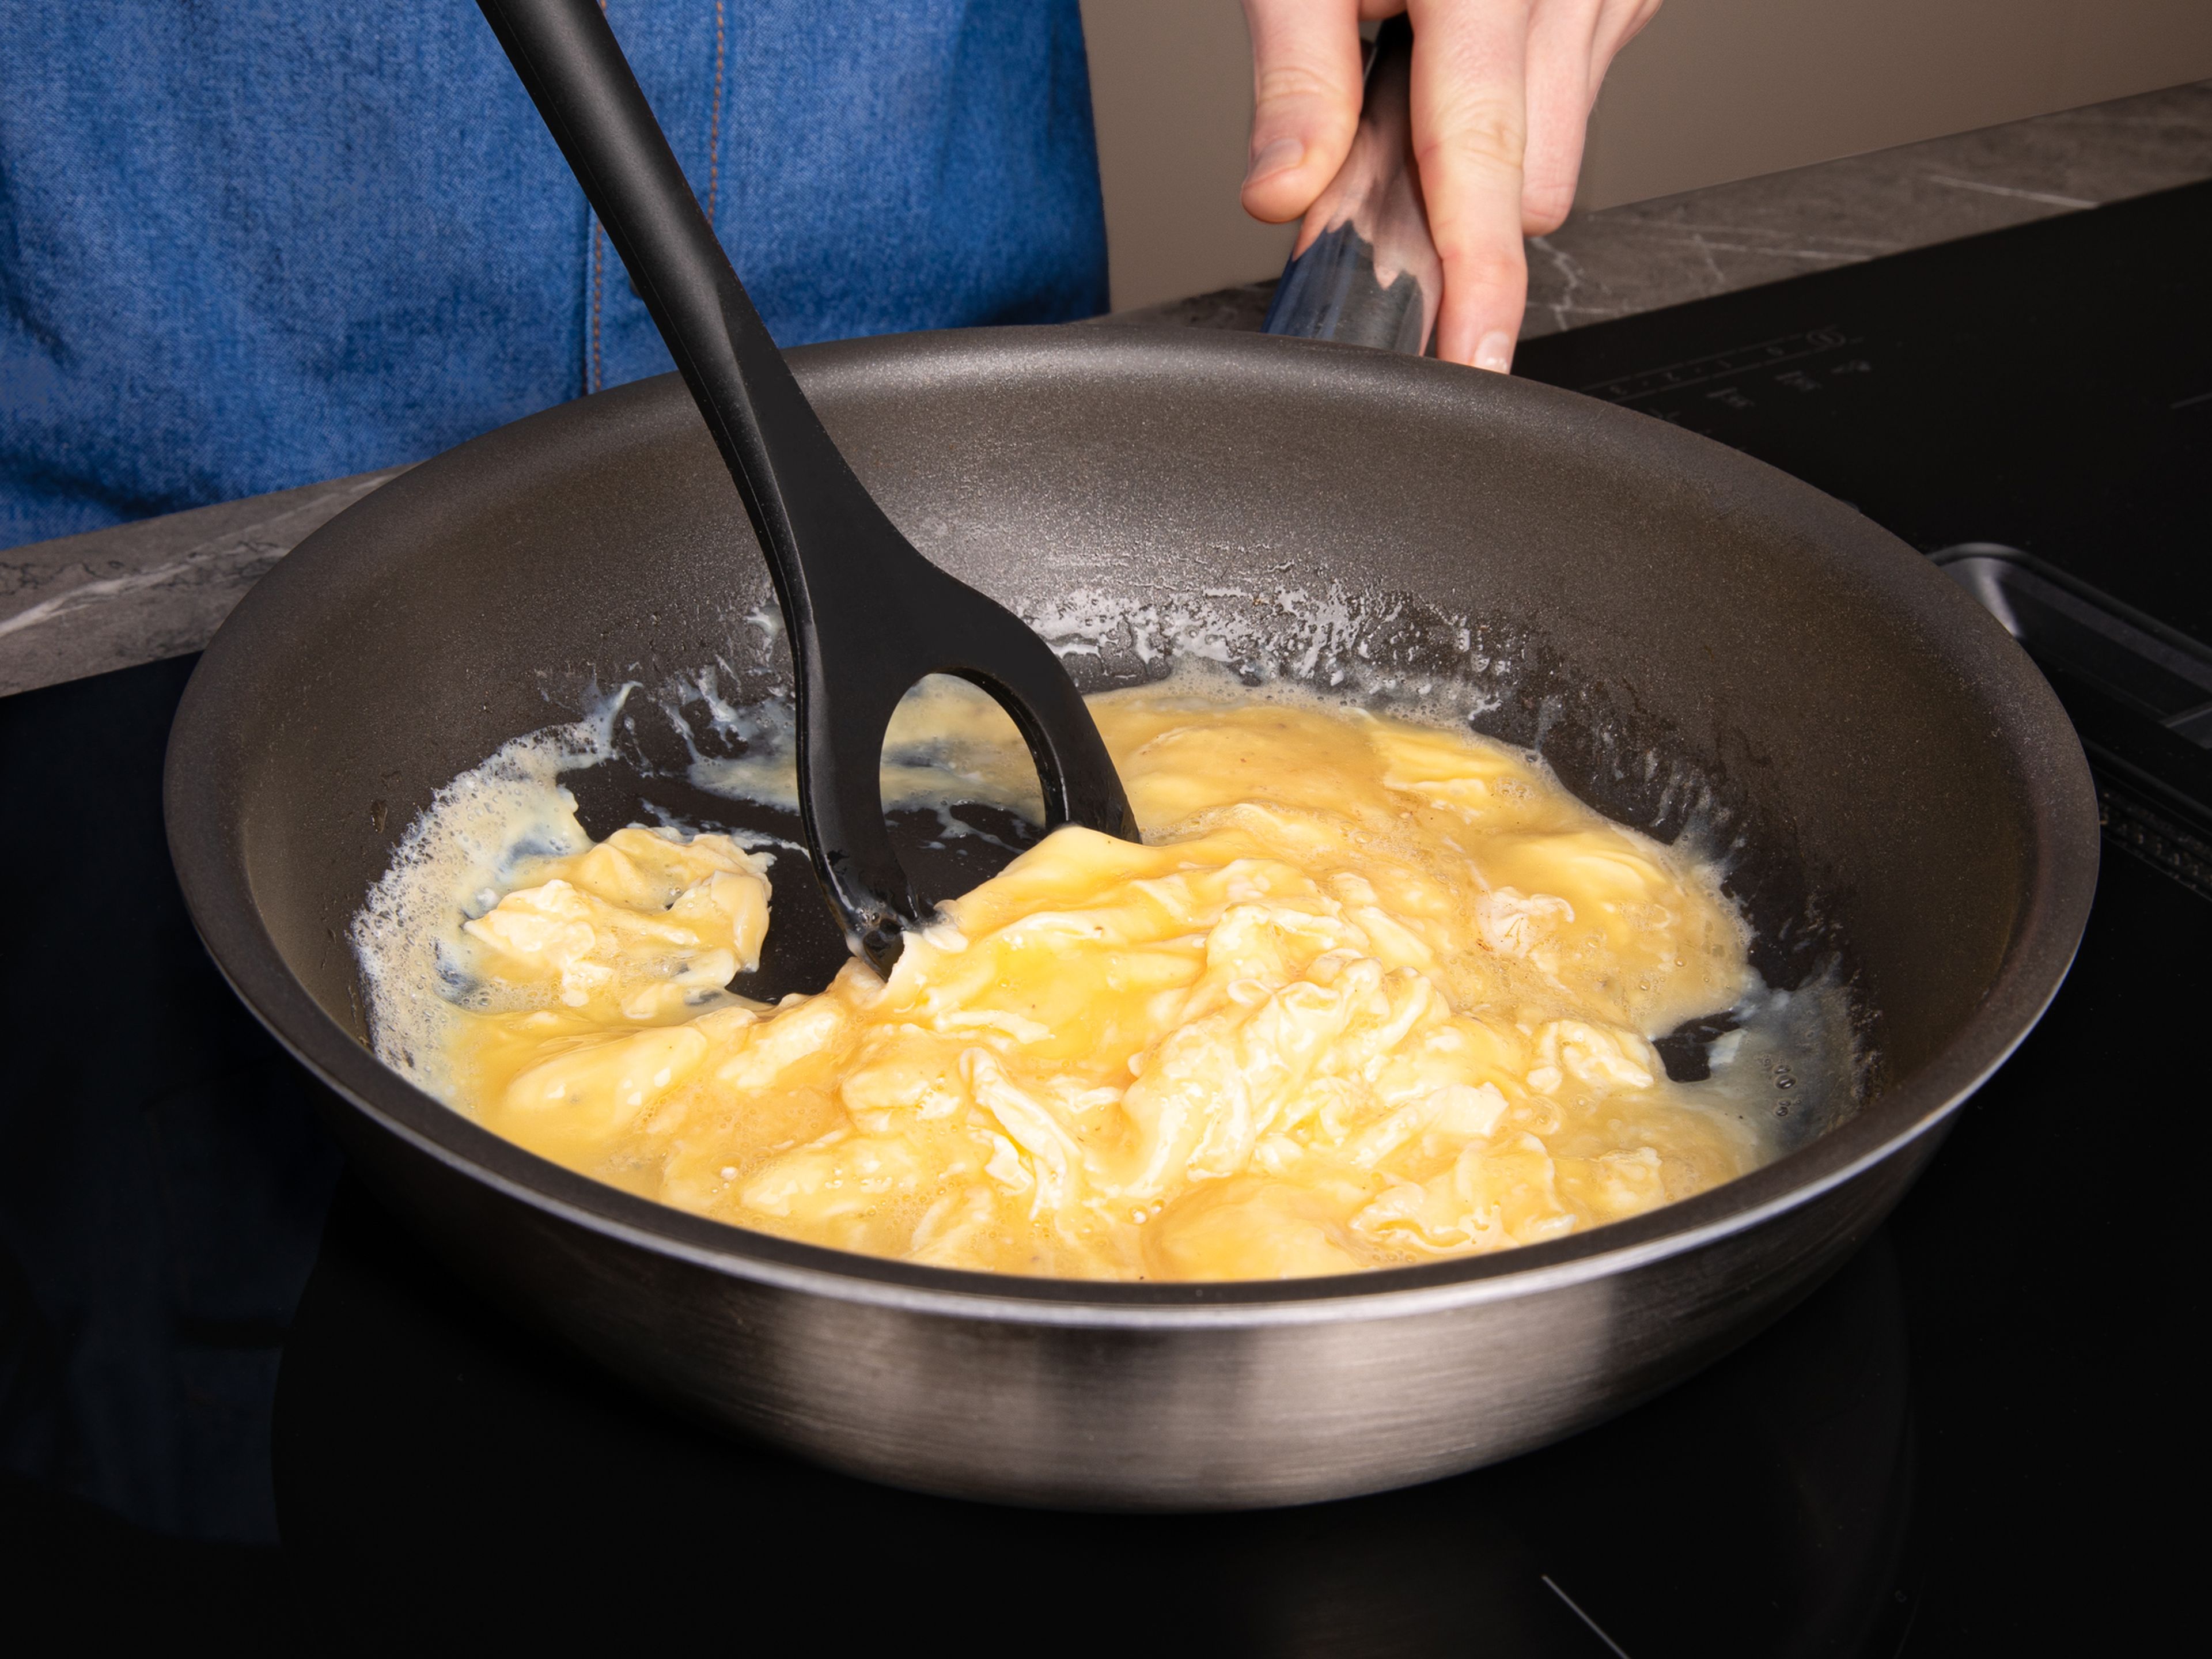 Beat eggs with a fork. Then heat some vegetable oil in a frying pan over high heat. Once oil is hot, pour in eggs and stir quickly. Continue to cook until eggs are set, then transfer eggs to a plate and set aside.